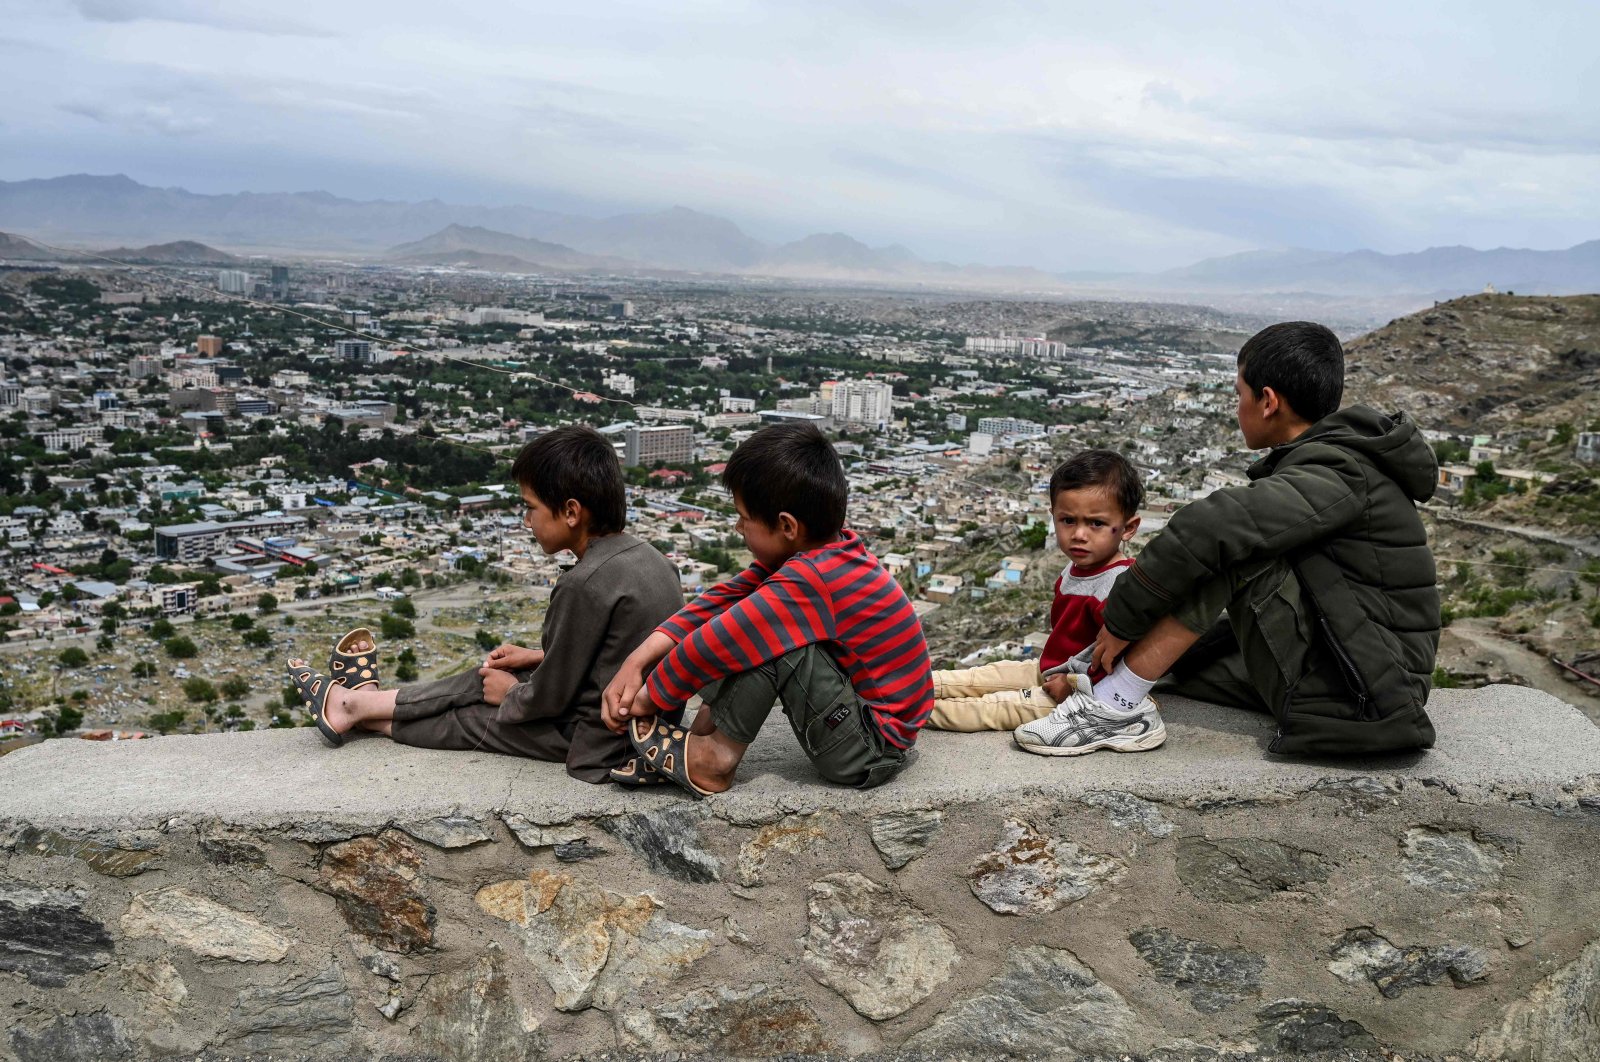 Children sit on a wall overlooking the city of Kabul, Afghanistan, May 17, 2020. (AFP Photo)